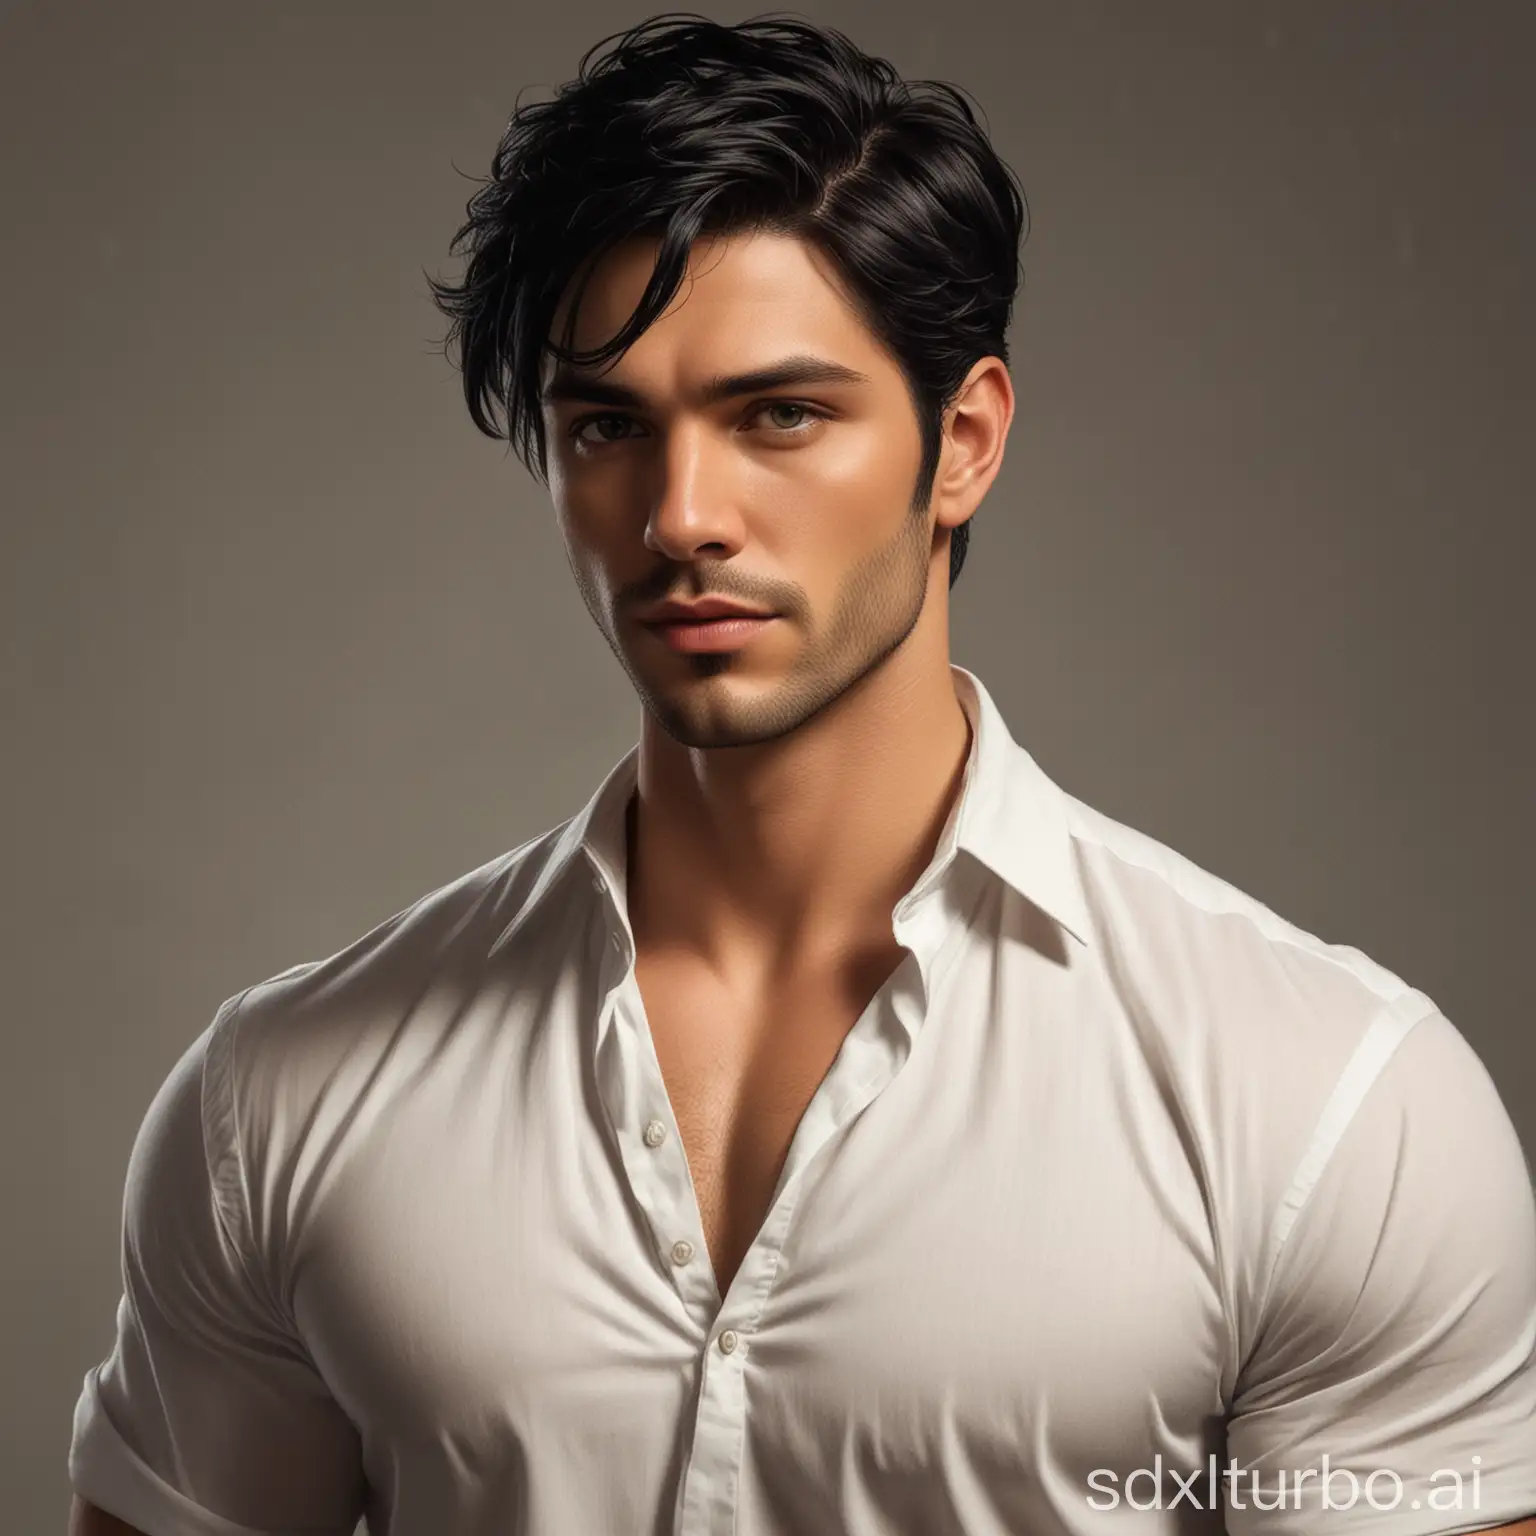 Male, black hair, short hair, early thirties, toned, attractive, handsome, manly, book character art